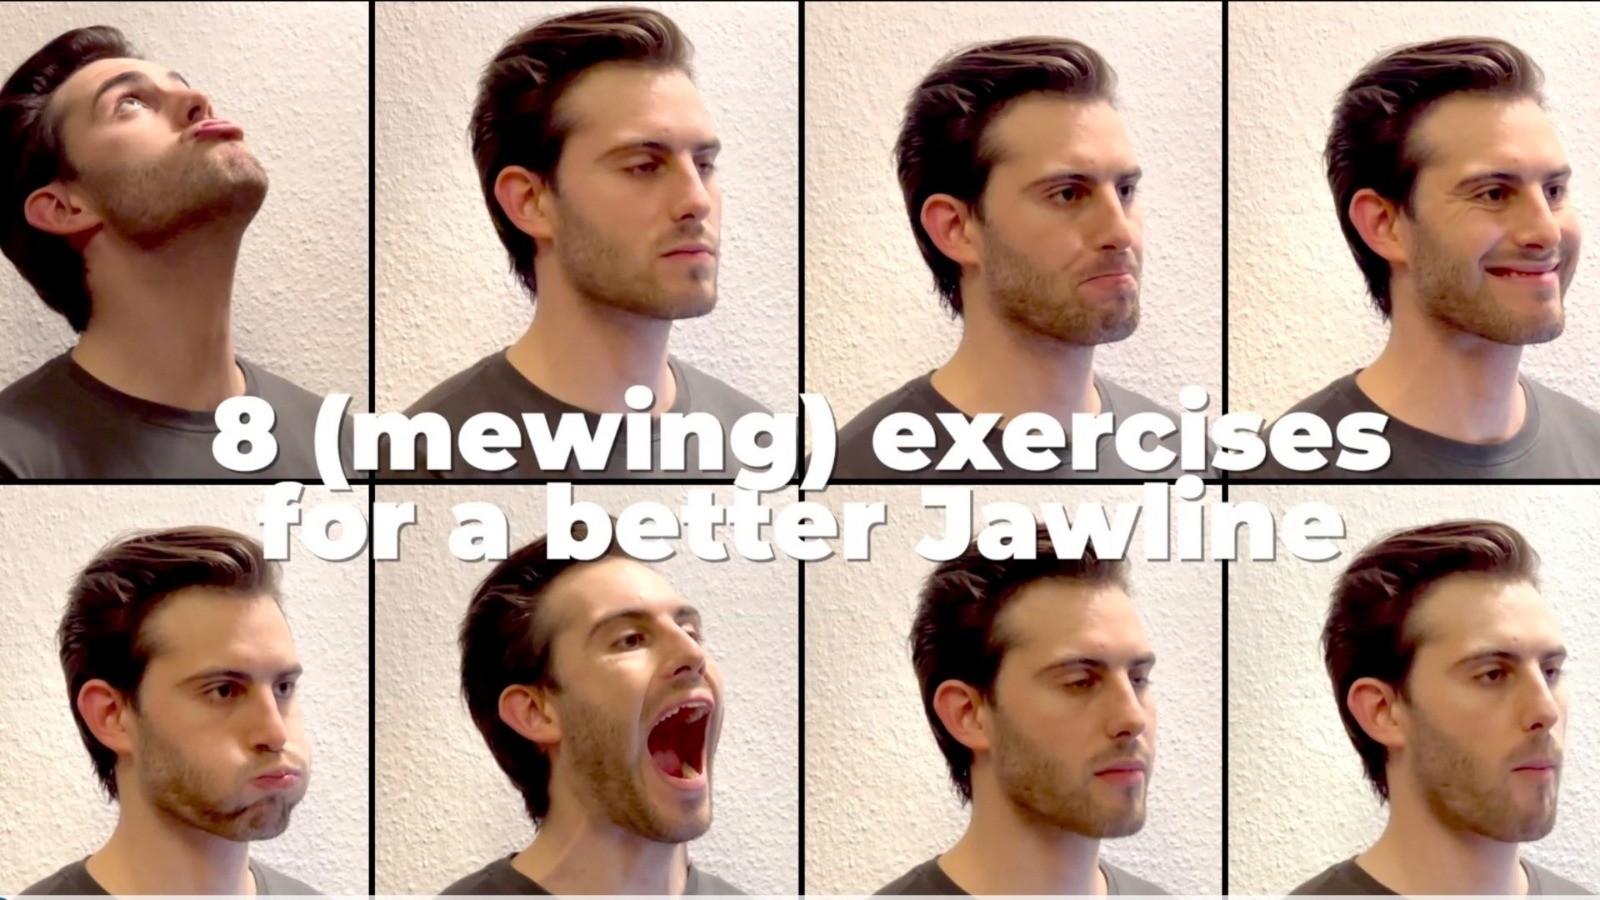 Jawline Exercises: 8 Moves for a Better Jawline